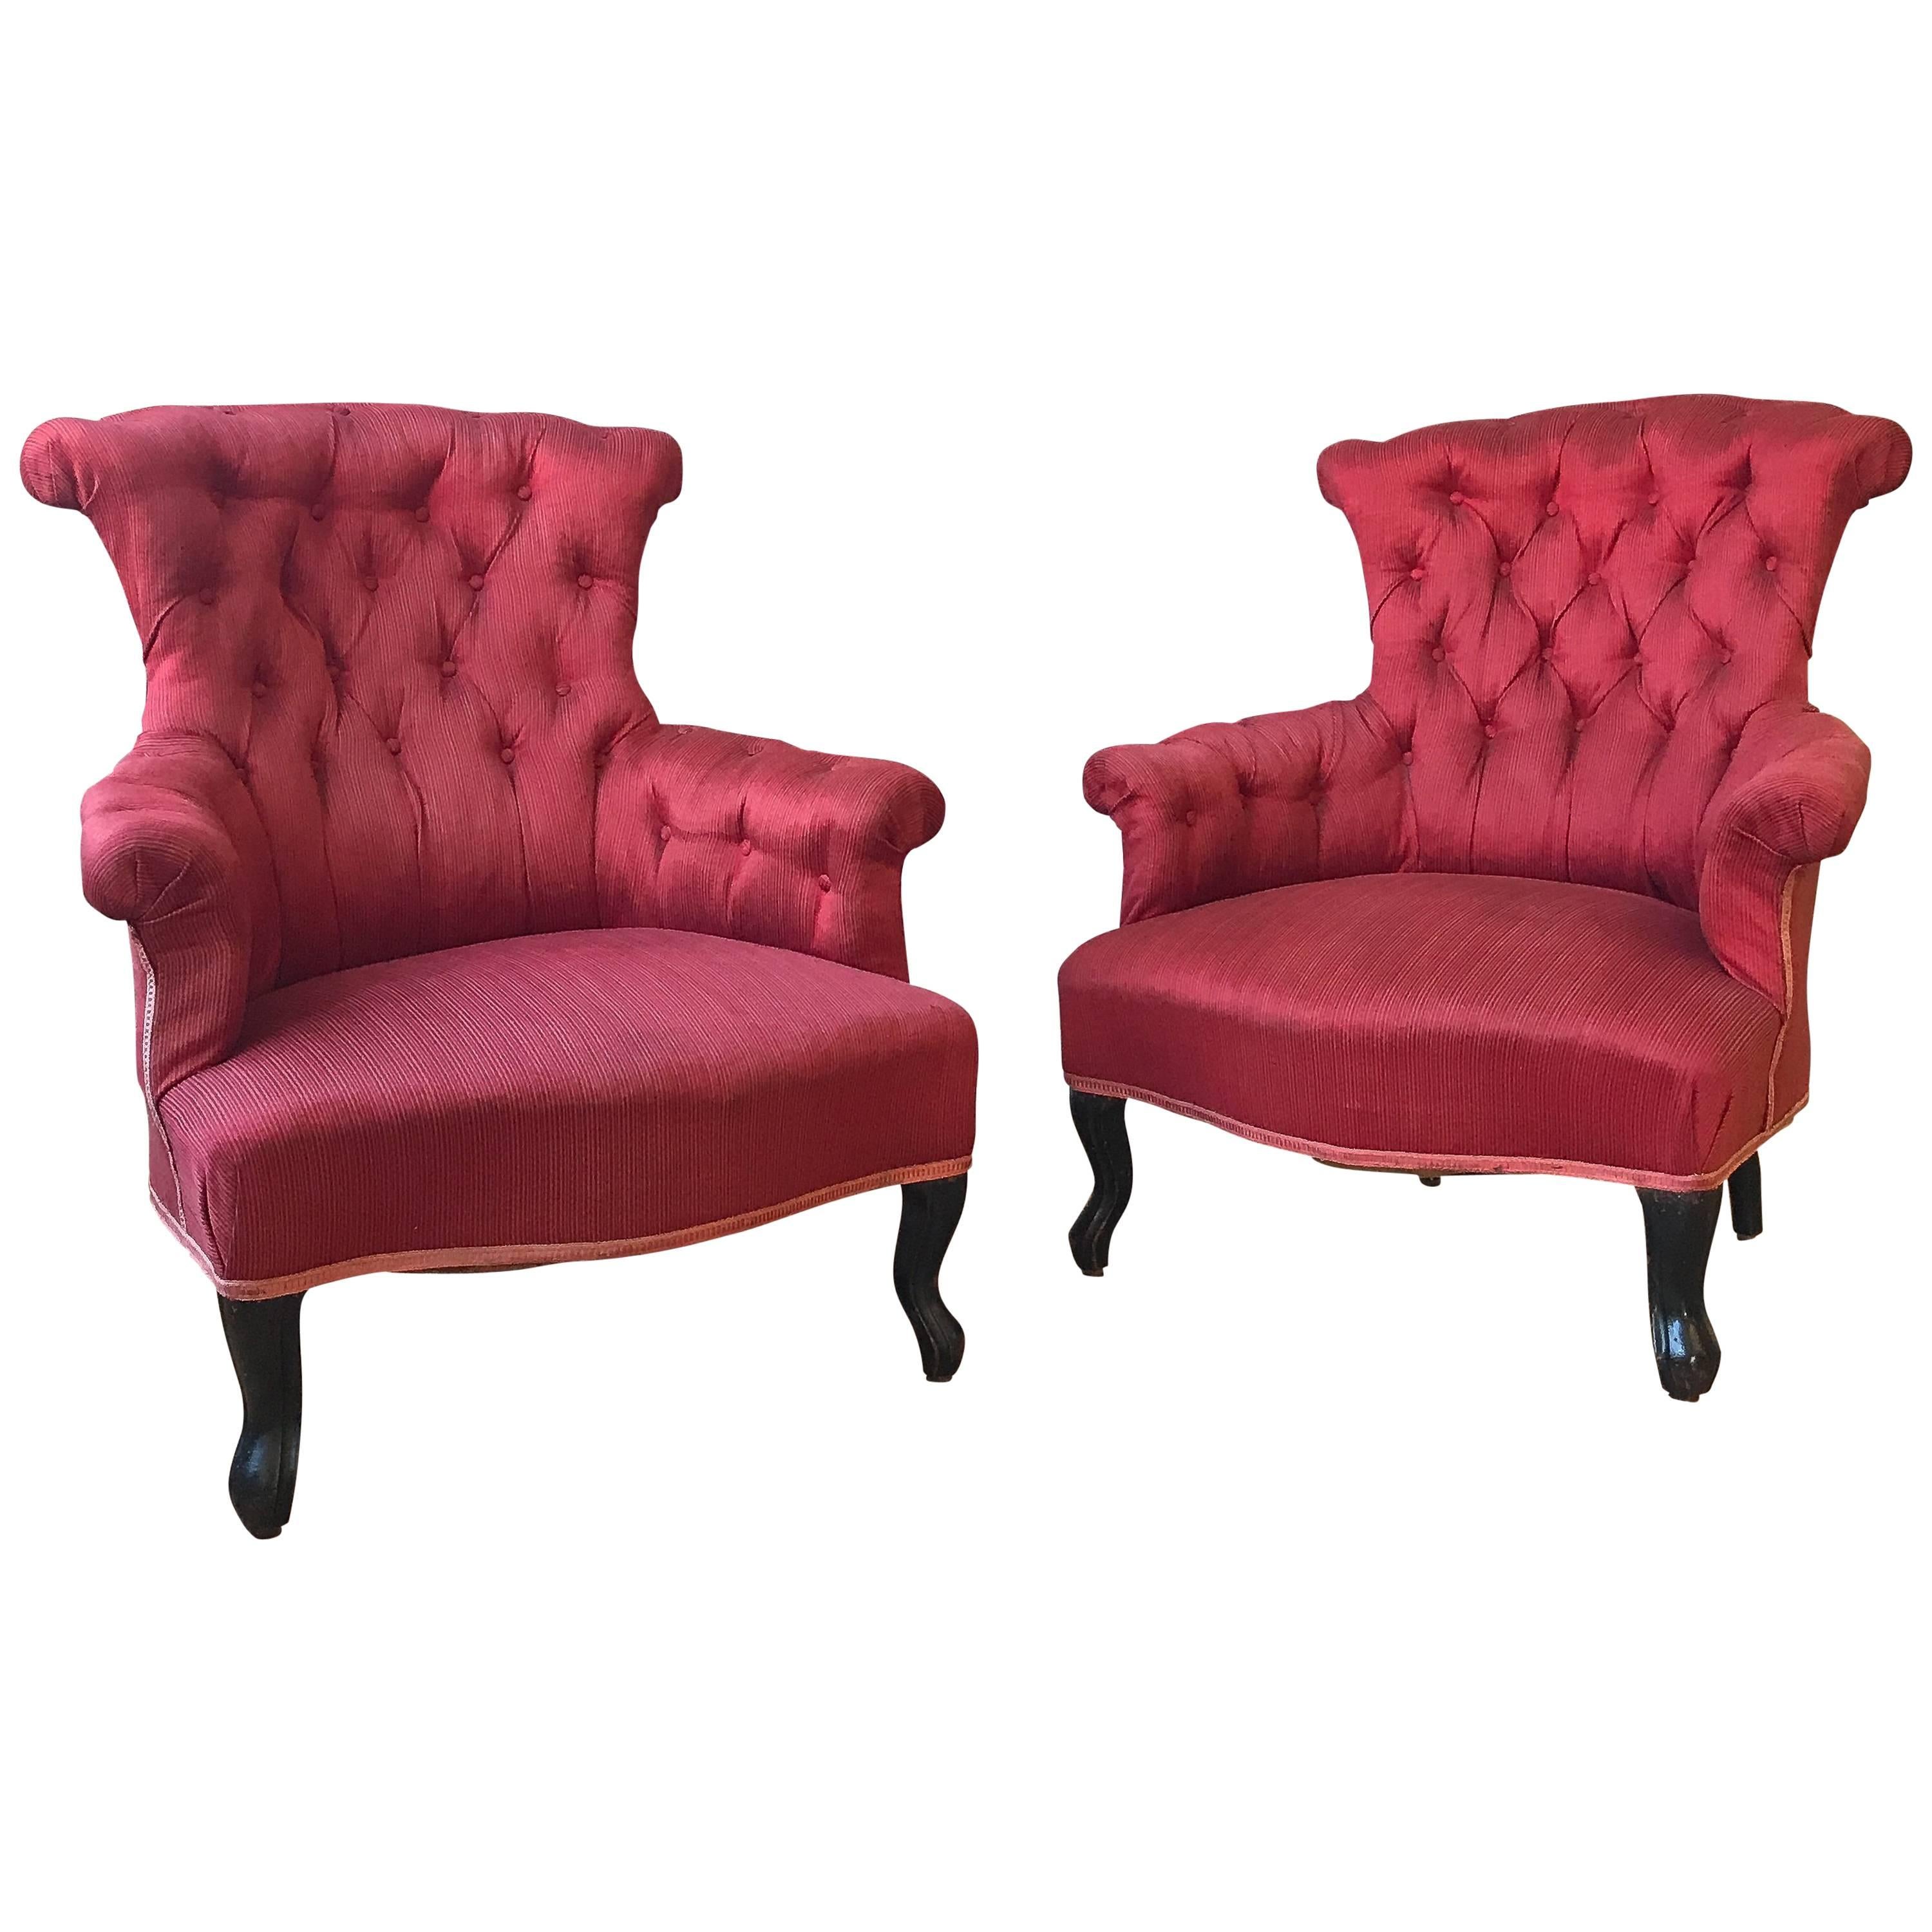 Pair of French Upholstered Armchairs in Red Fabric